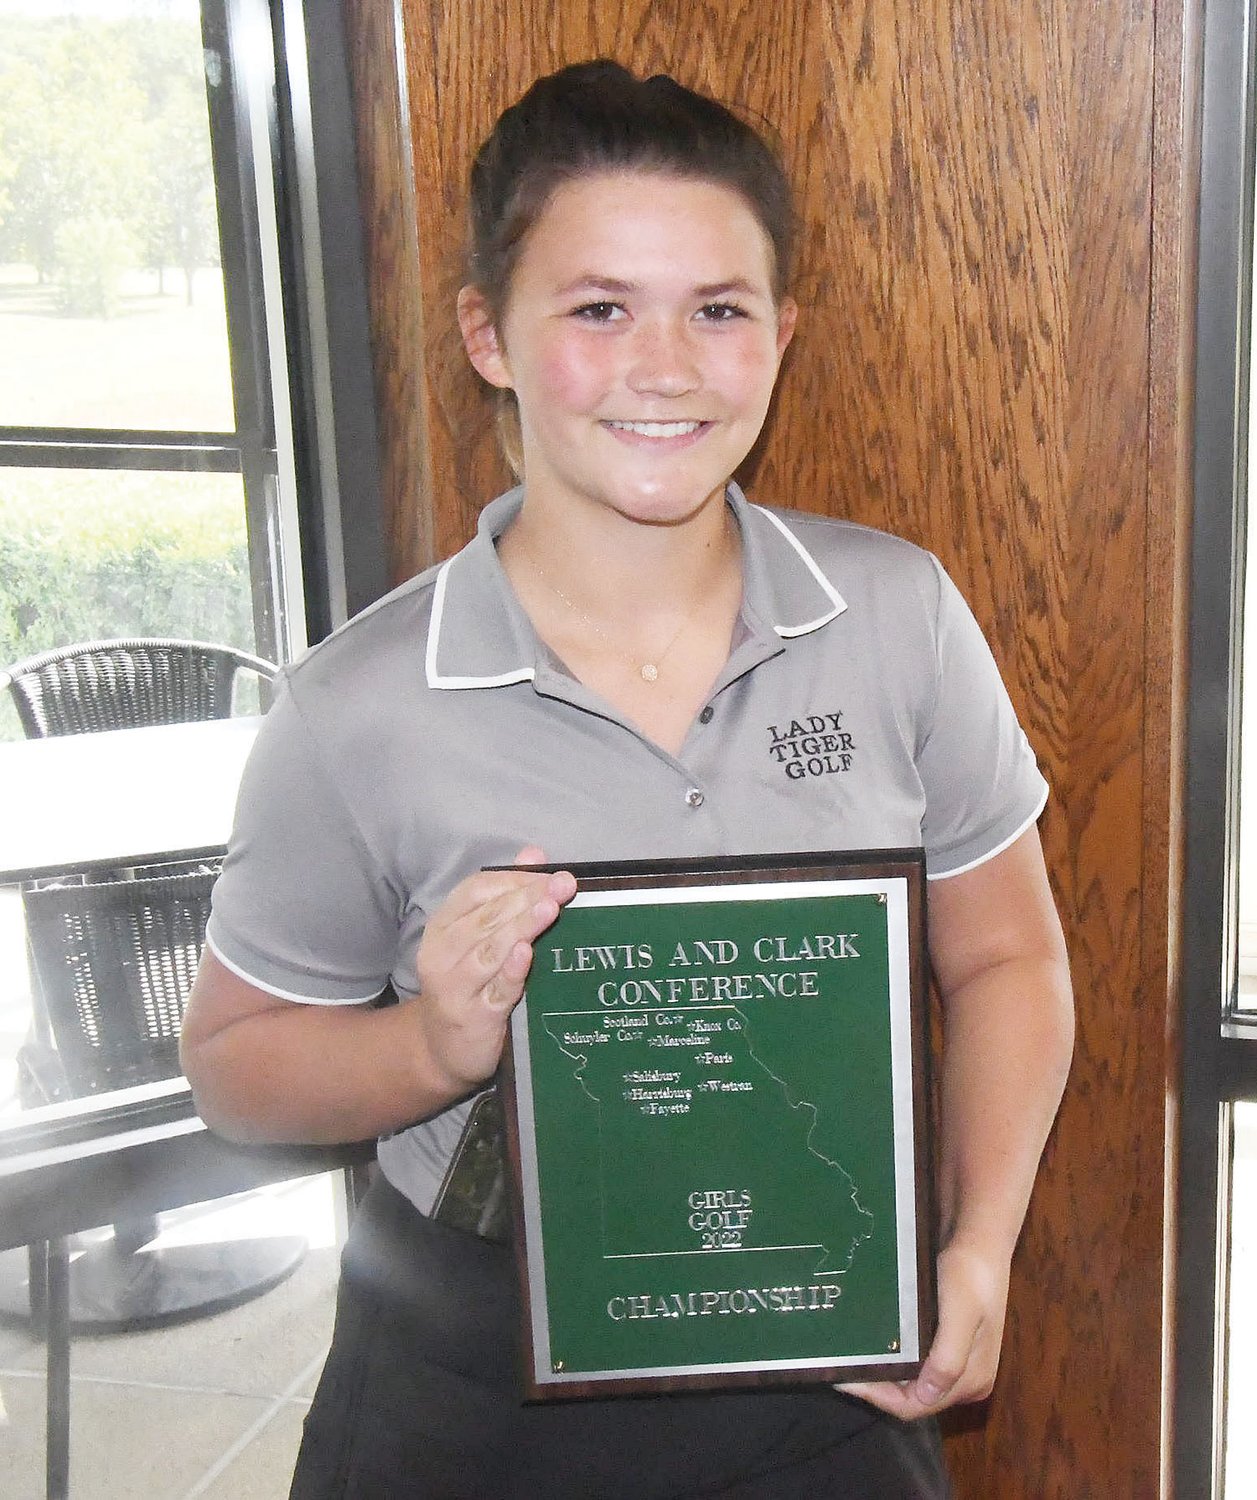 Tess Sheerman smiles and proudly displays Marceline's first-place plaque as the Tigers won the Lewis & Clark Conference title on Tuesday at Heritage Hills Golf Course in Moberly. Sheerman also was the medalist with an 87.